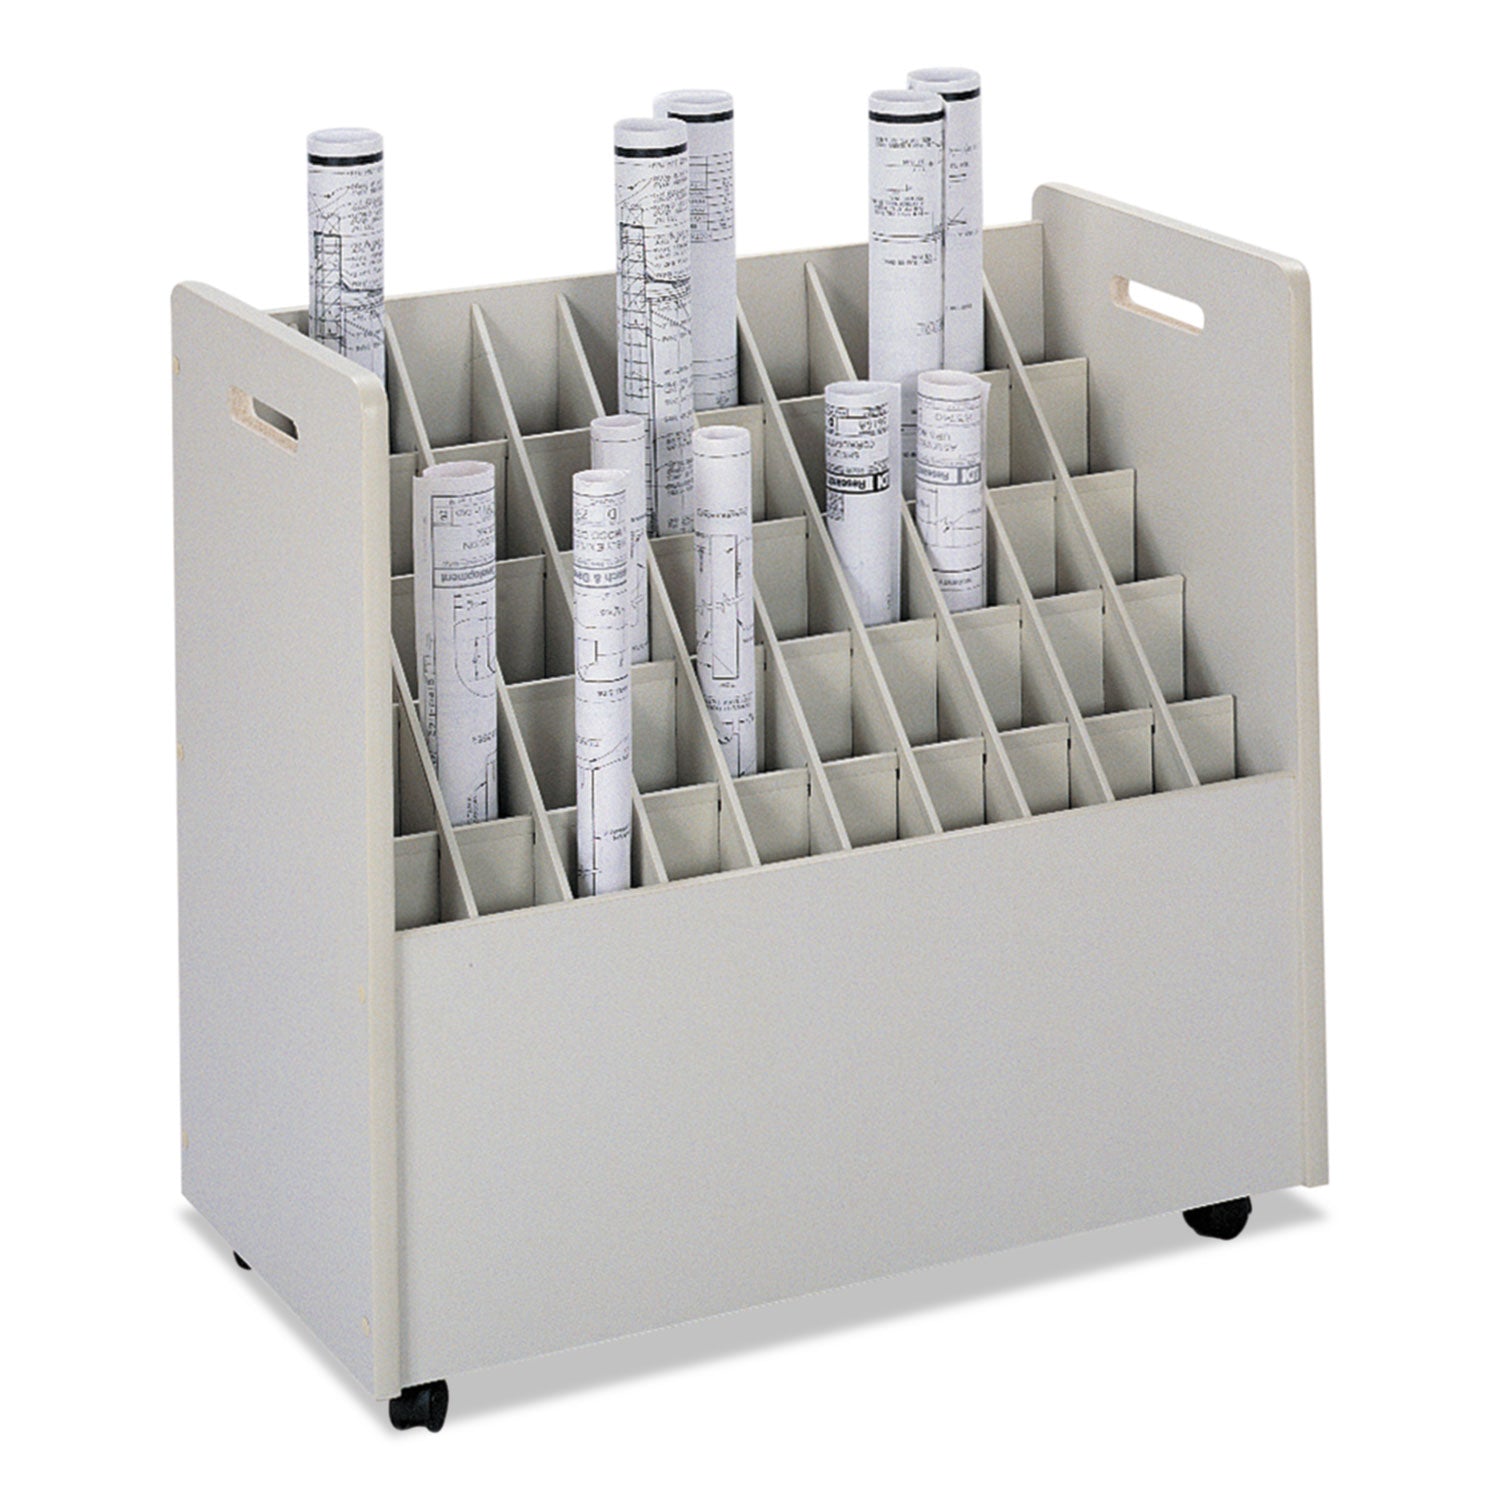 Laminate Mobile Roll Files, 50 Compartments, 30.25w x 15.75d x 29.25h, Putty - 